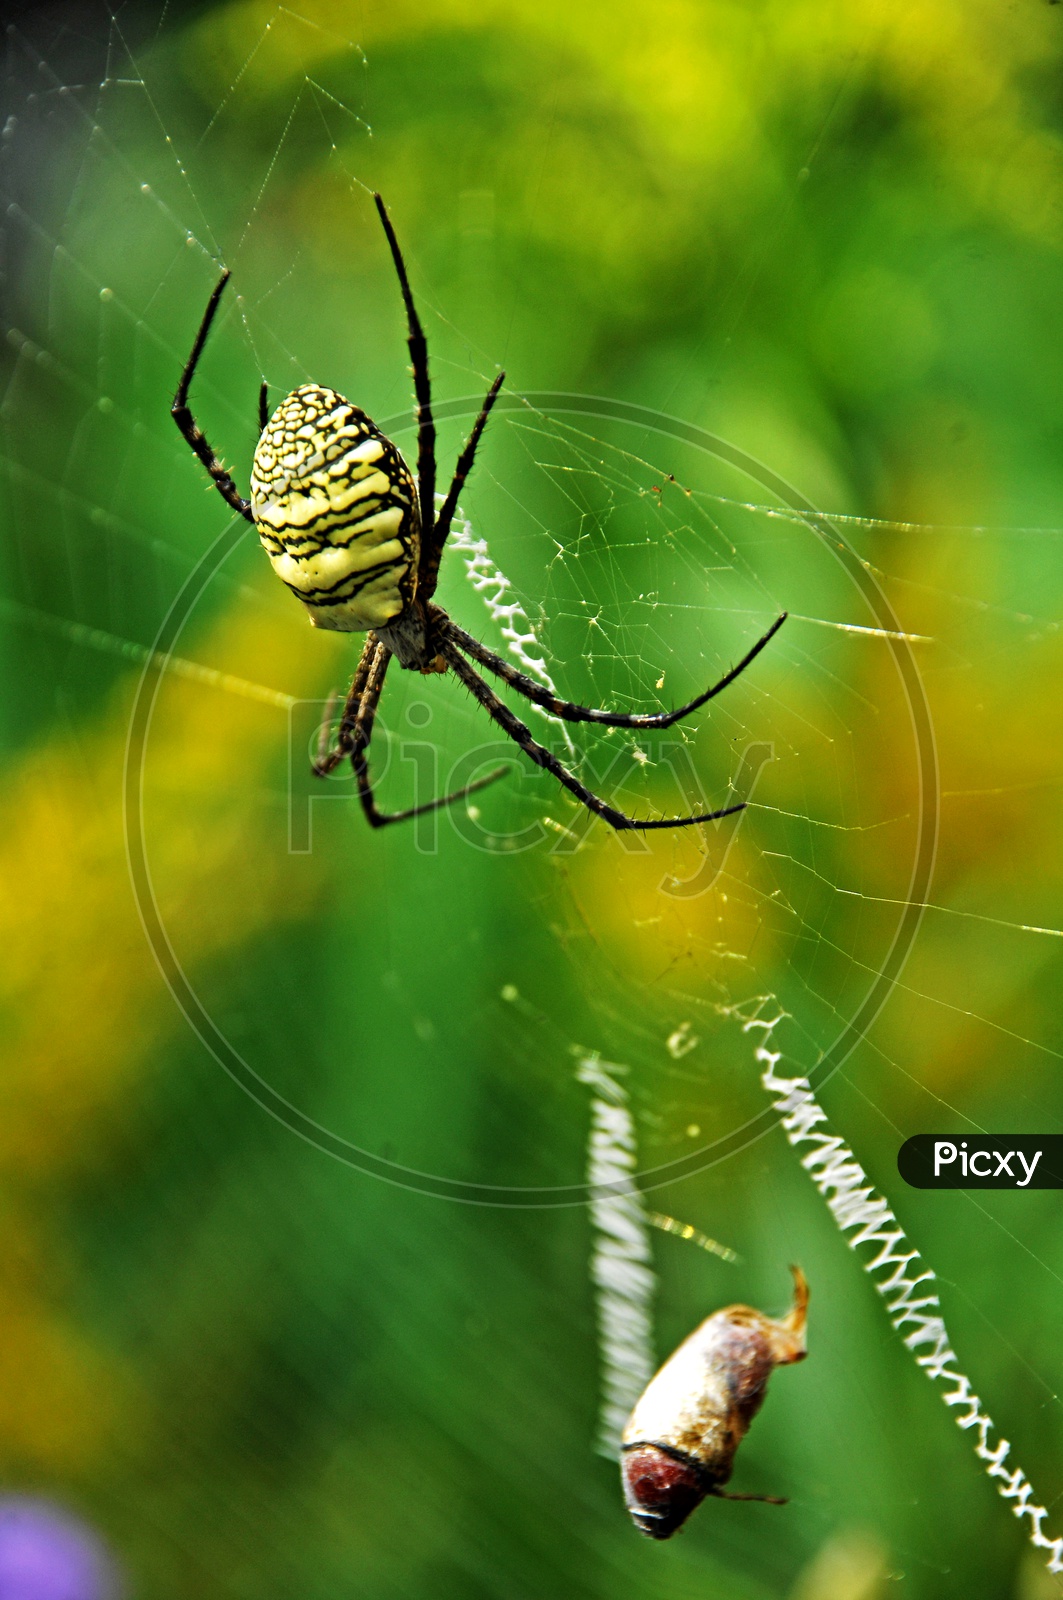 A Spider weaving the web